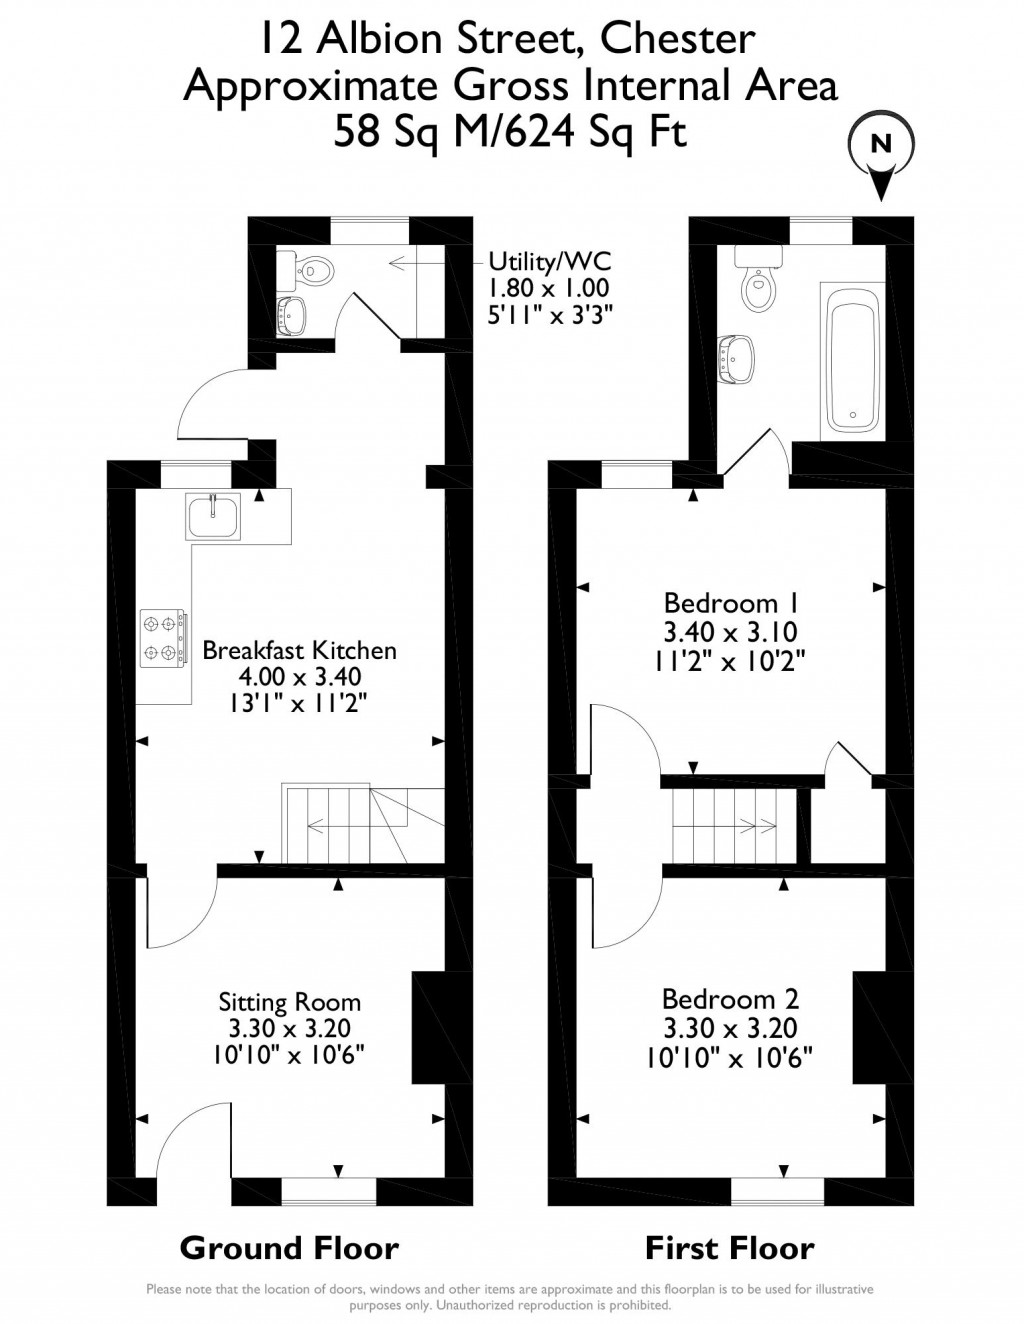 Floorplans For Within The City Walls